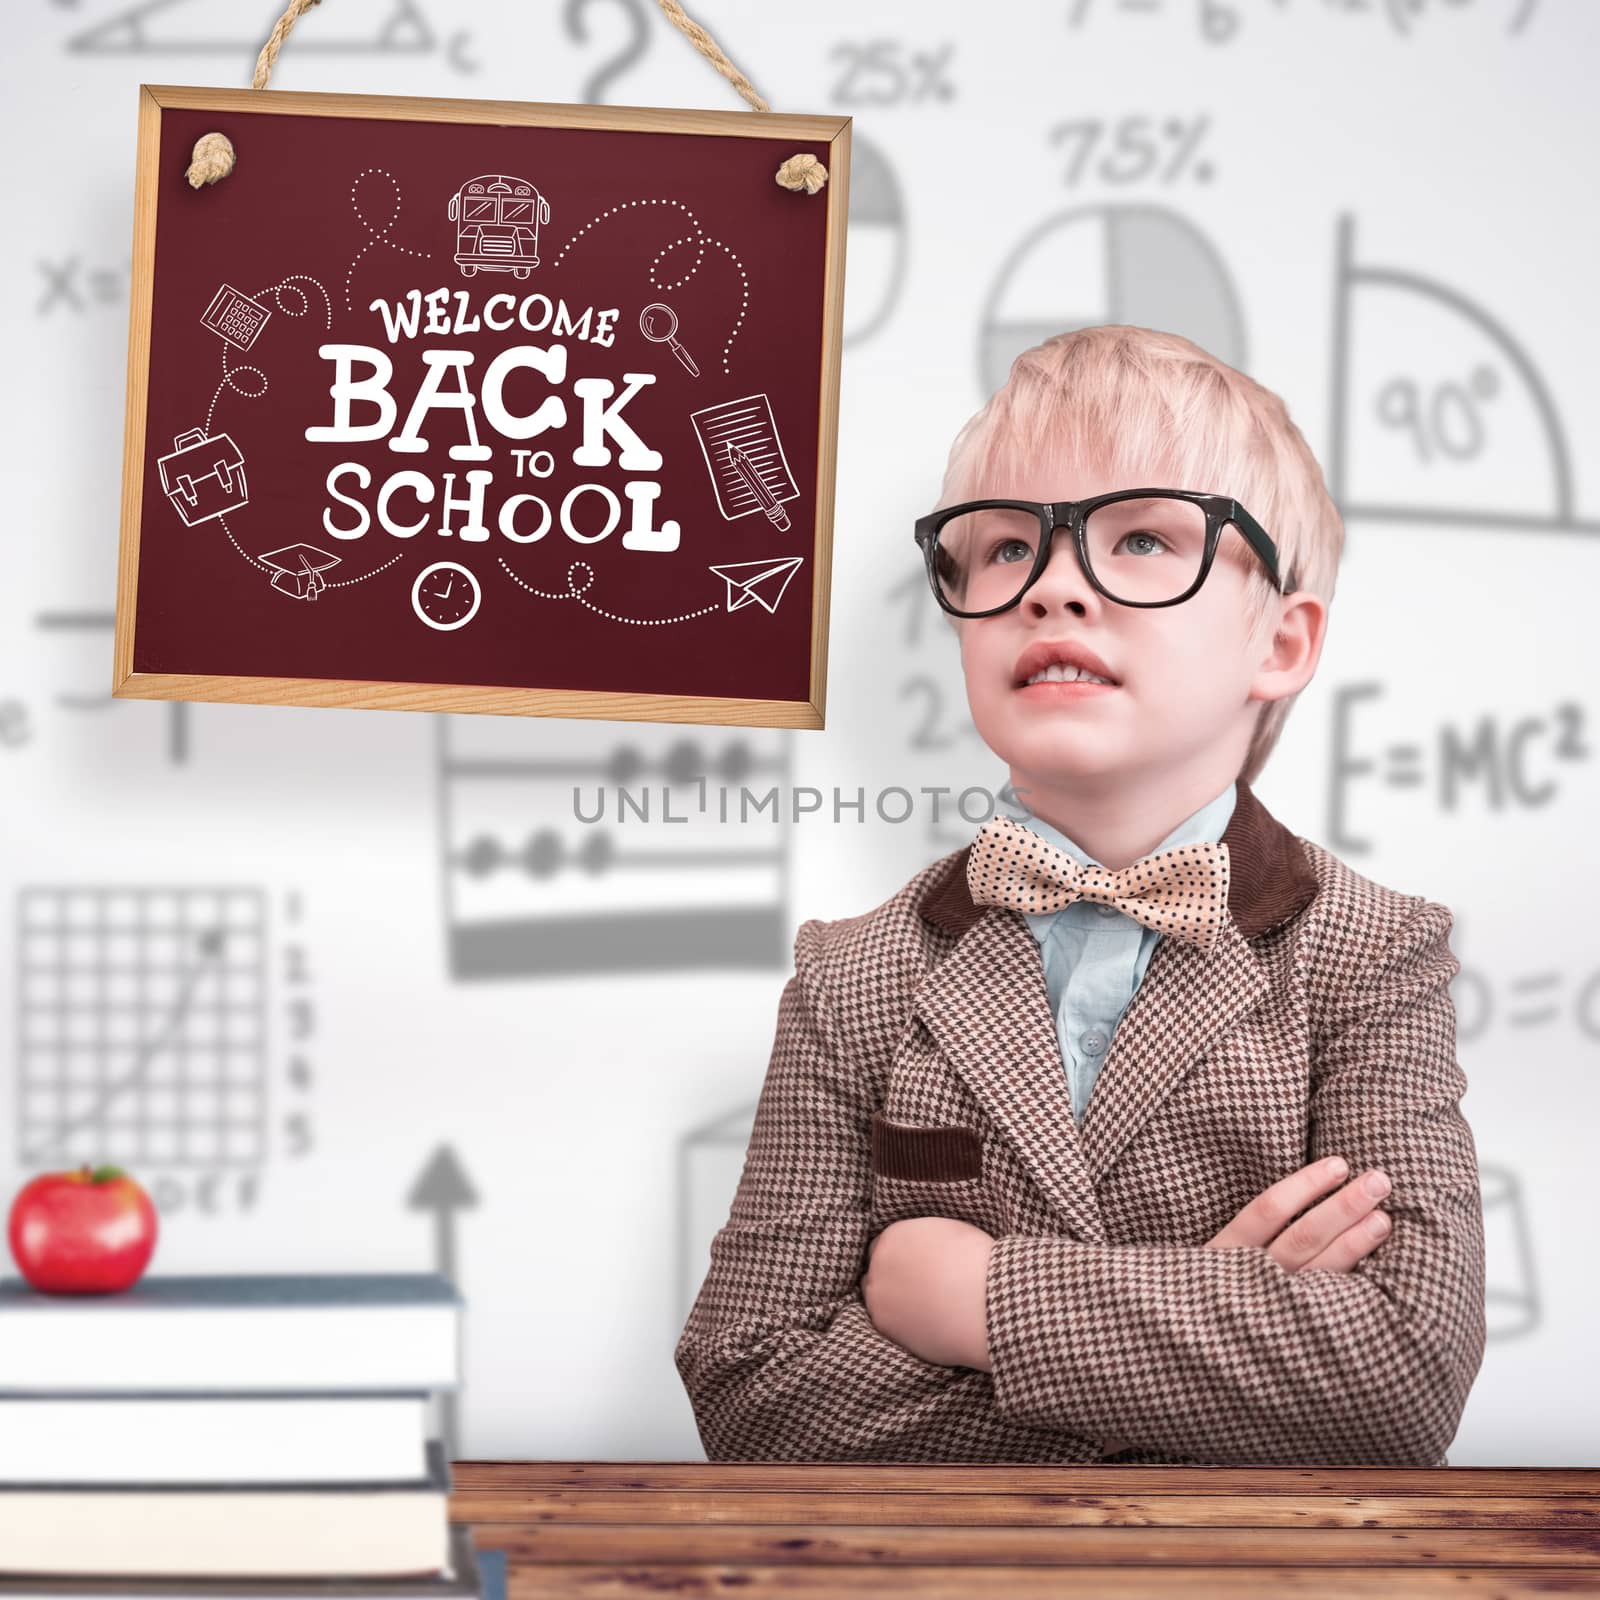 Cute pupil dressed up as teacher  against wooden planks background